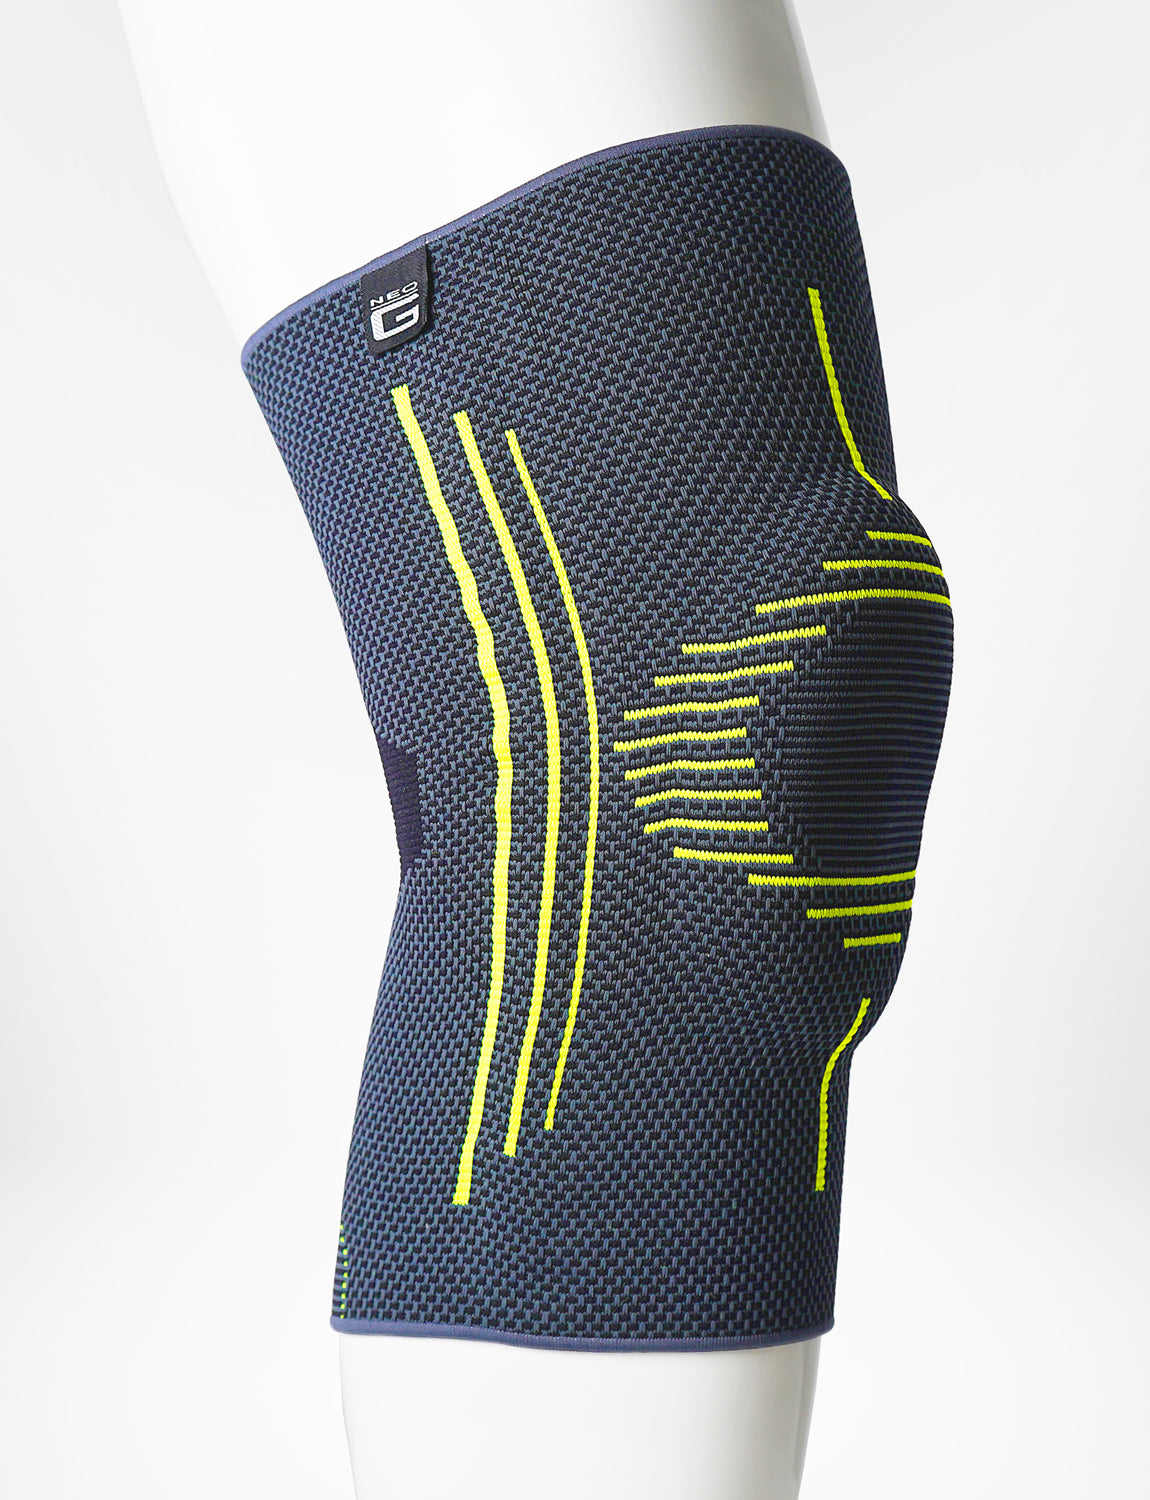 A side view of a dark blue, textured Neo G USA Active Plus Knee Support featuring bright yellow contour lines, displayed on a featureless white mannequin torso.